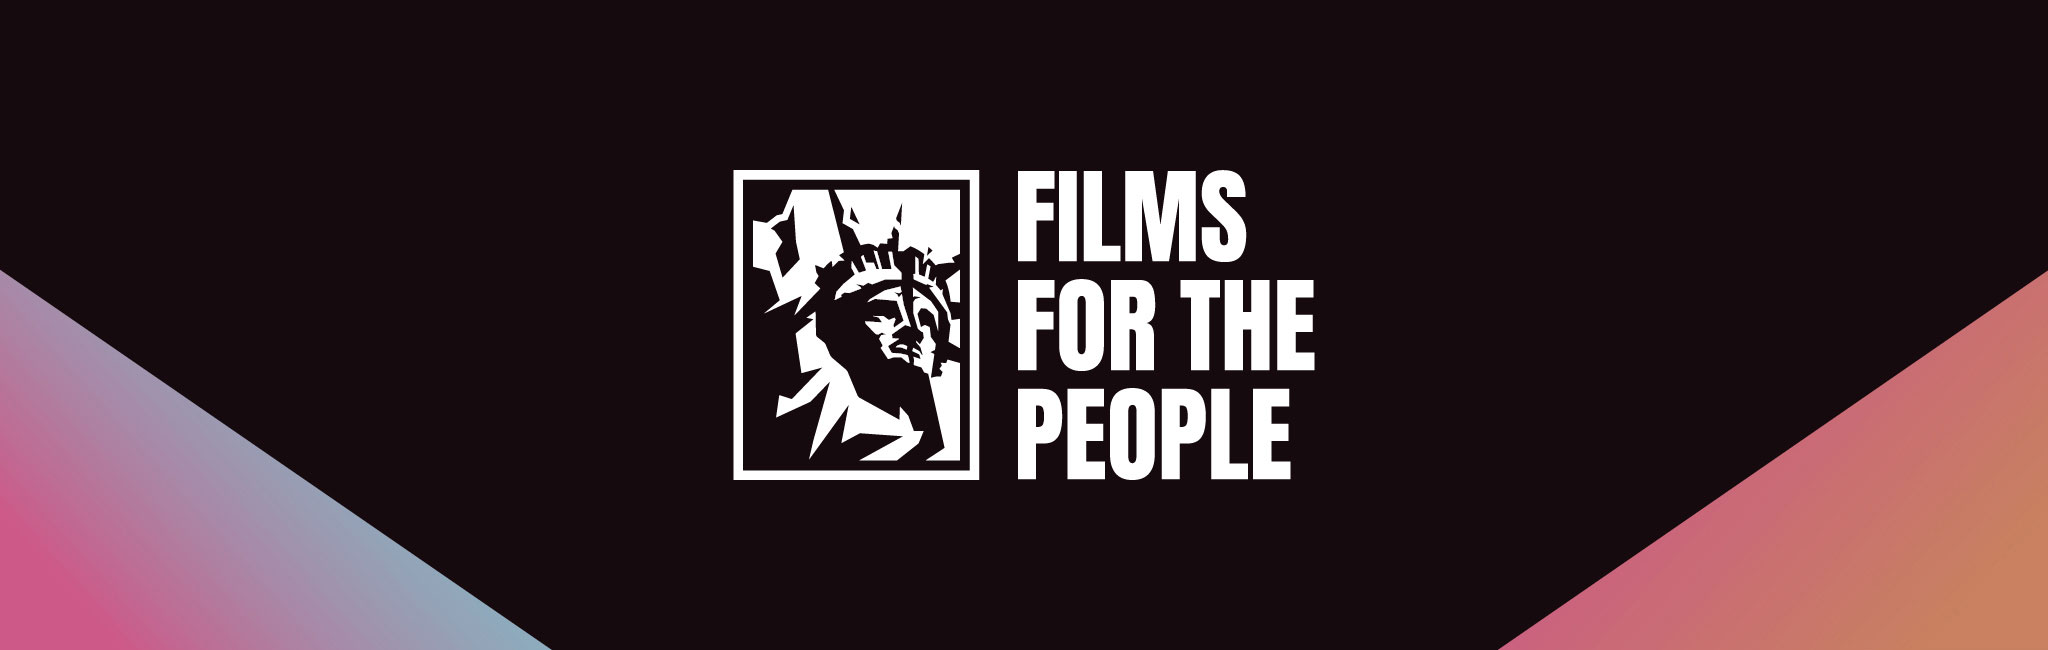 Films for the People